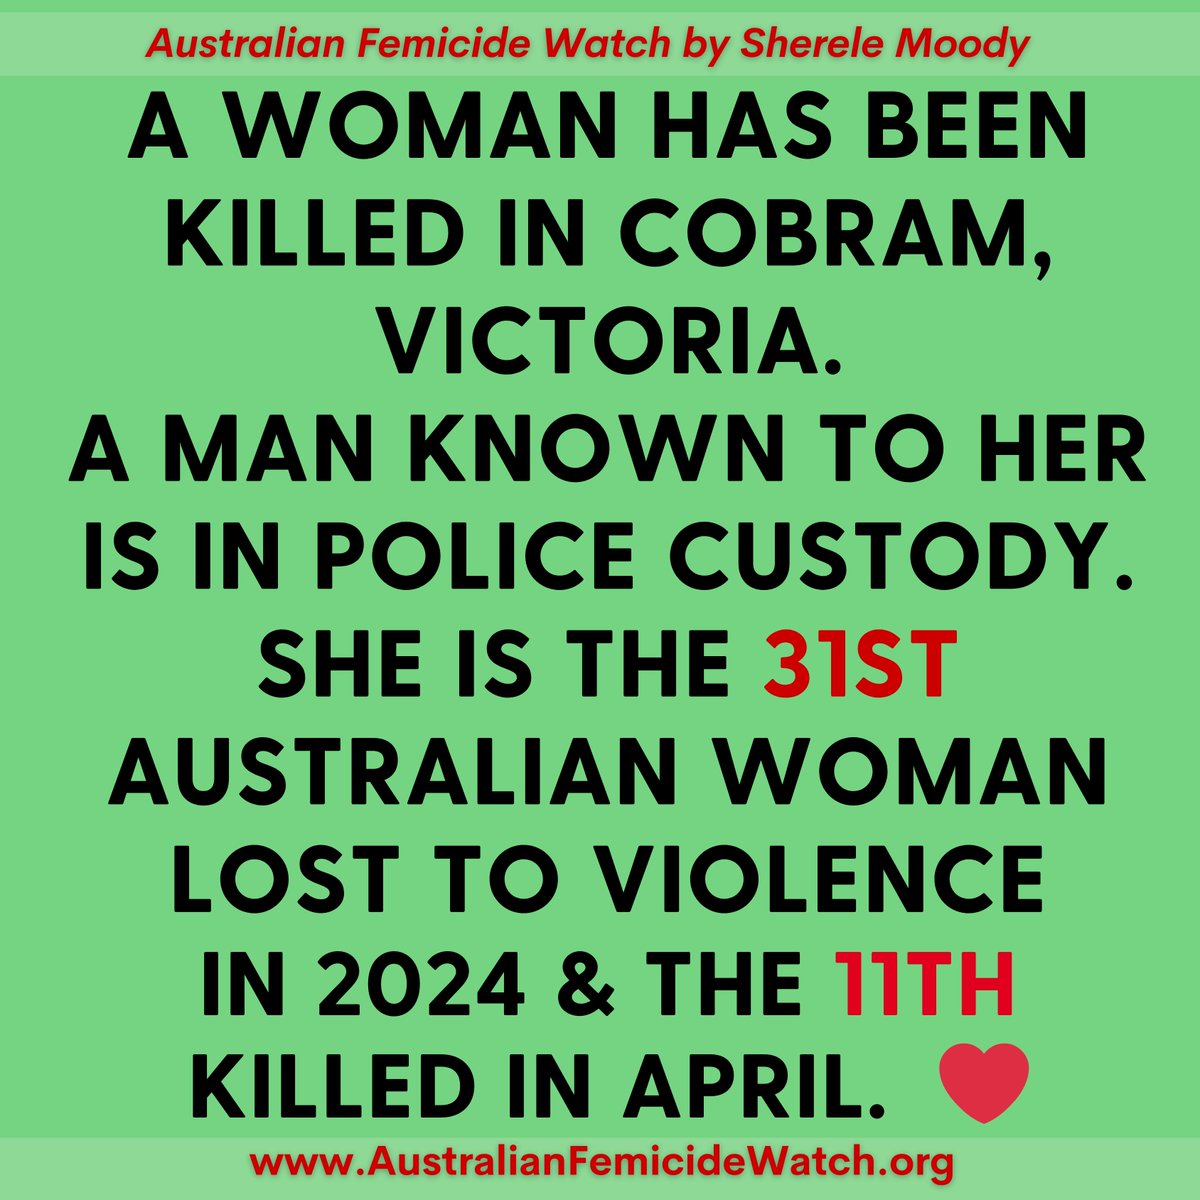 For the 31st time this year - and the 11th time this month - I'm sadly and maddingly reporting another woman killed. A 49-year-old woman has been killed in a home at Cobram in Victoria. A man known to her is in custody and assisting police. She is the 31st woman killed this…